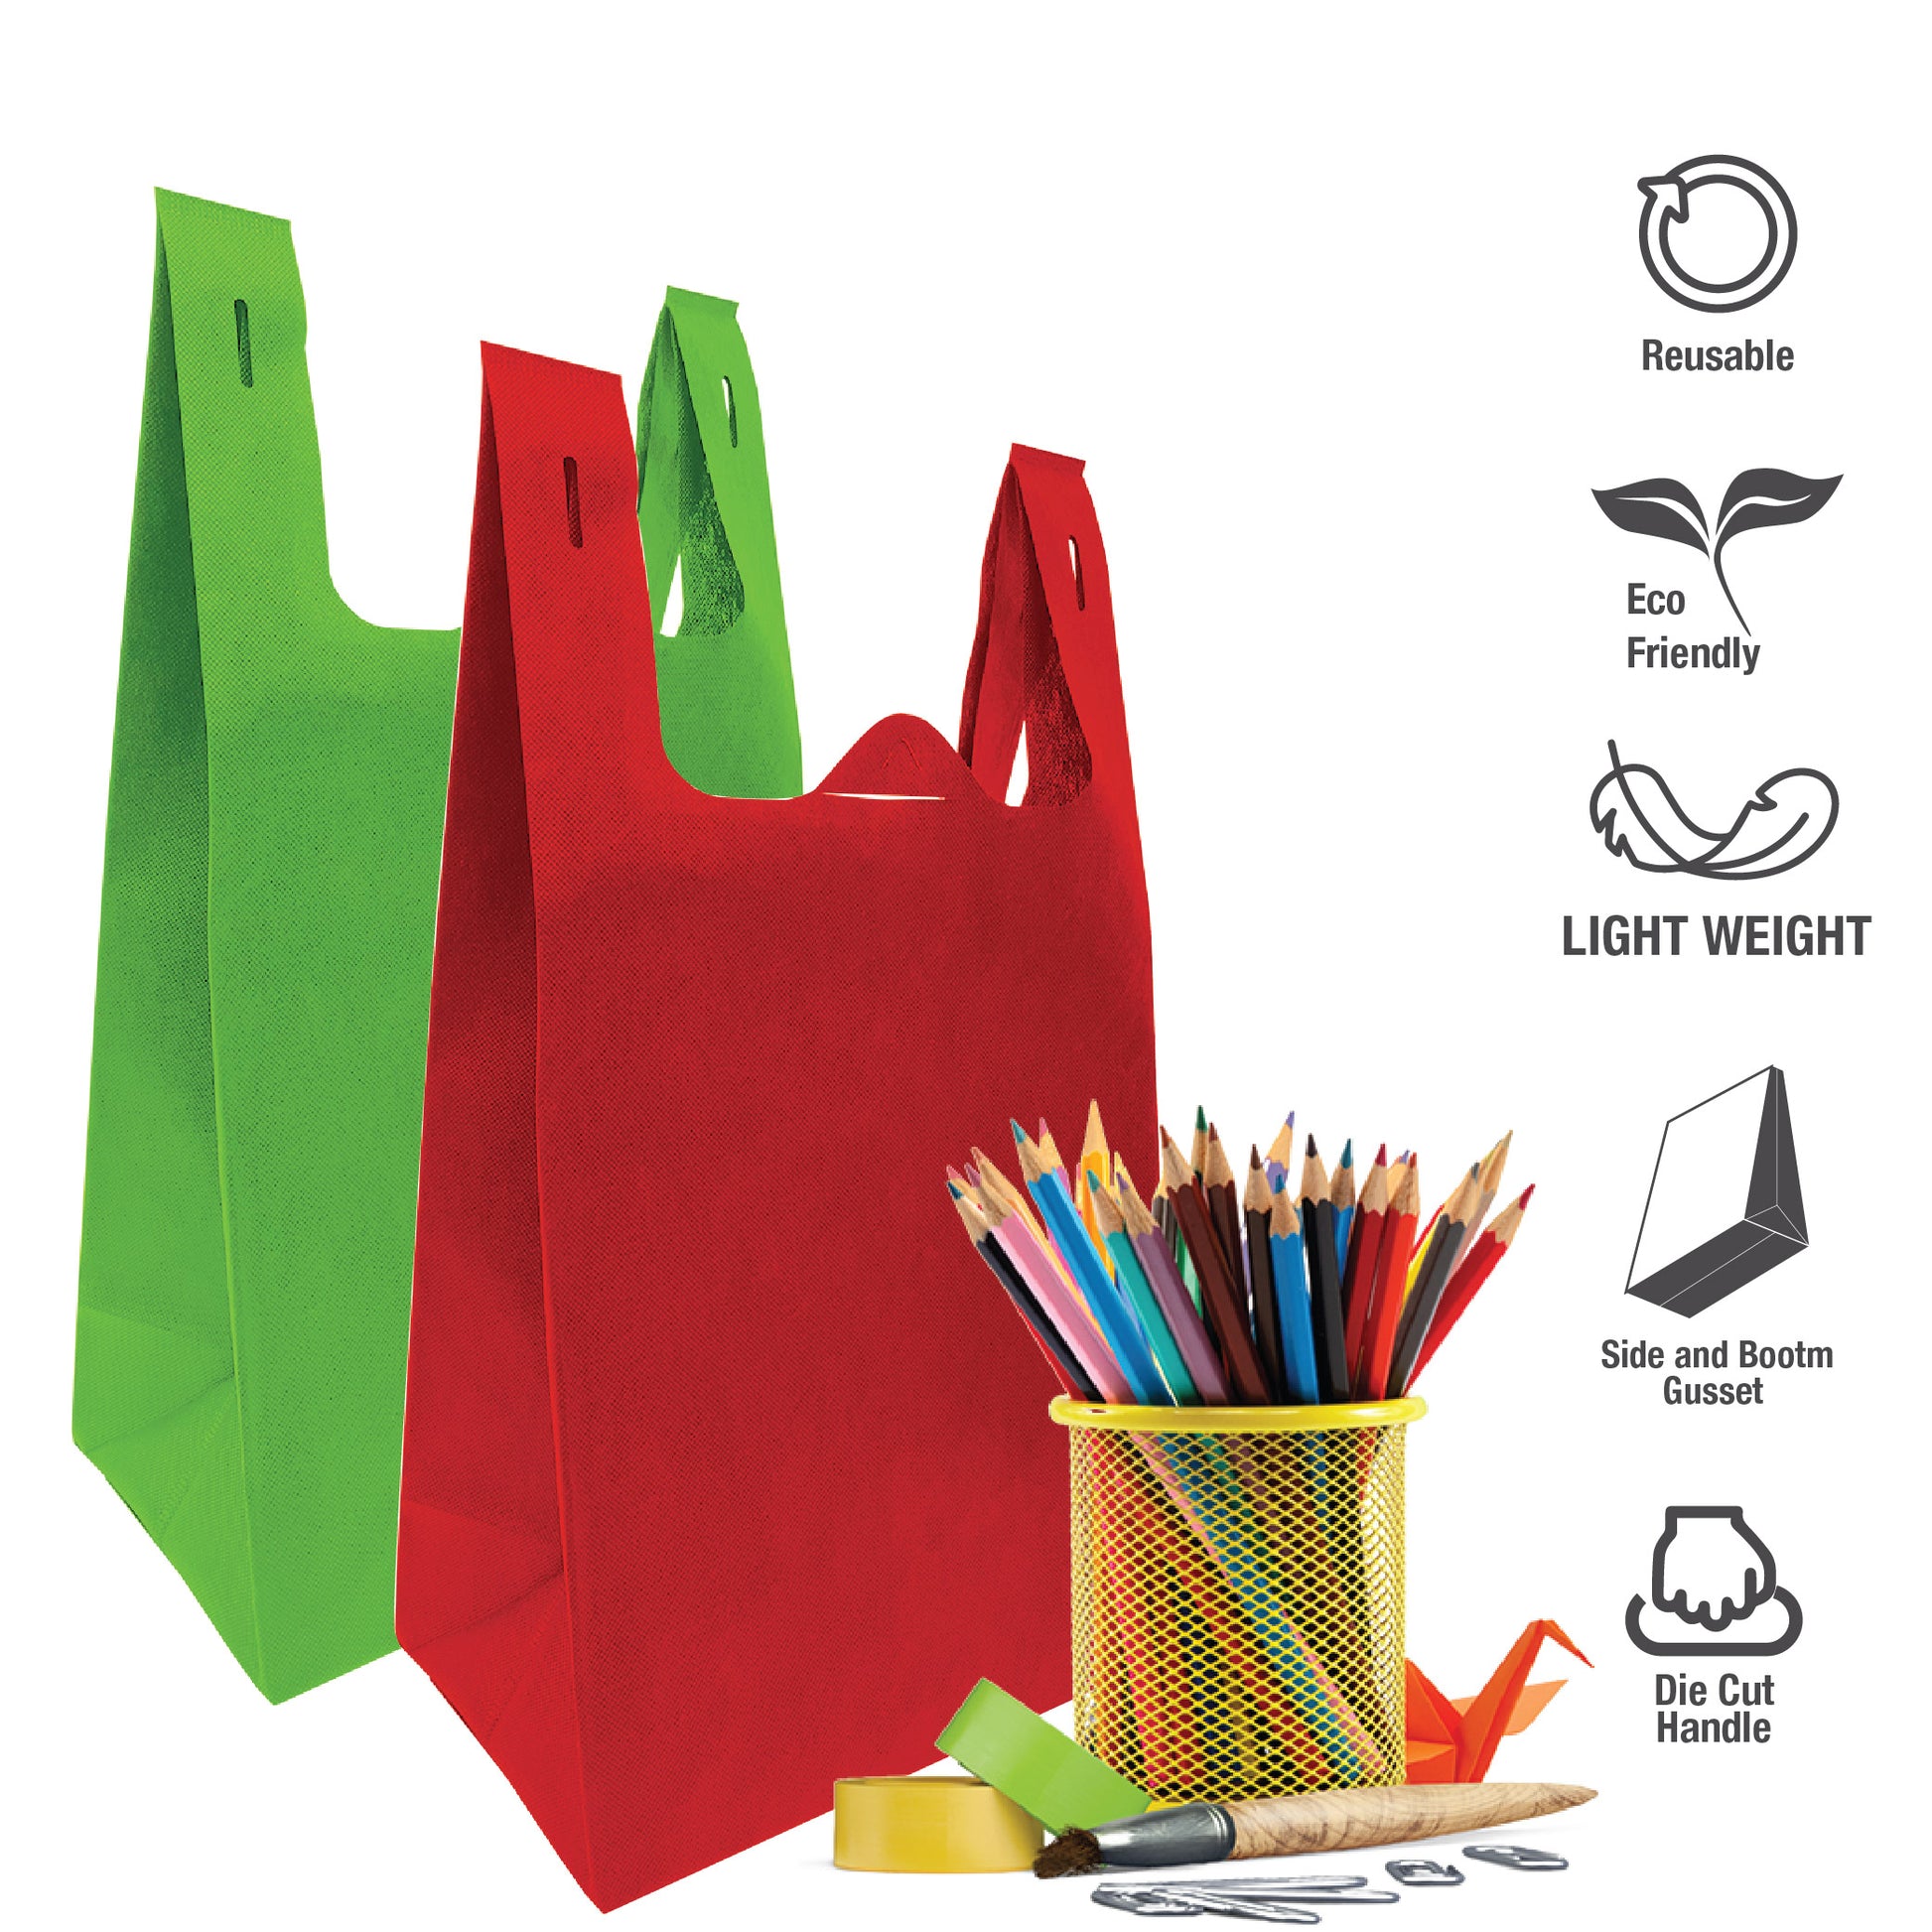 A reusable T-shirt non-woven shopping bag filled with pencils and other items, in red and green colors.